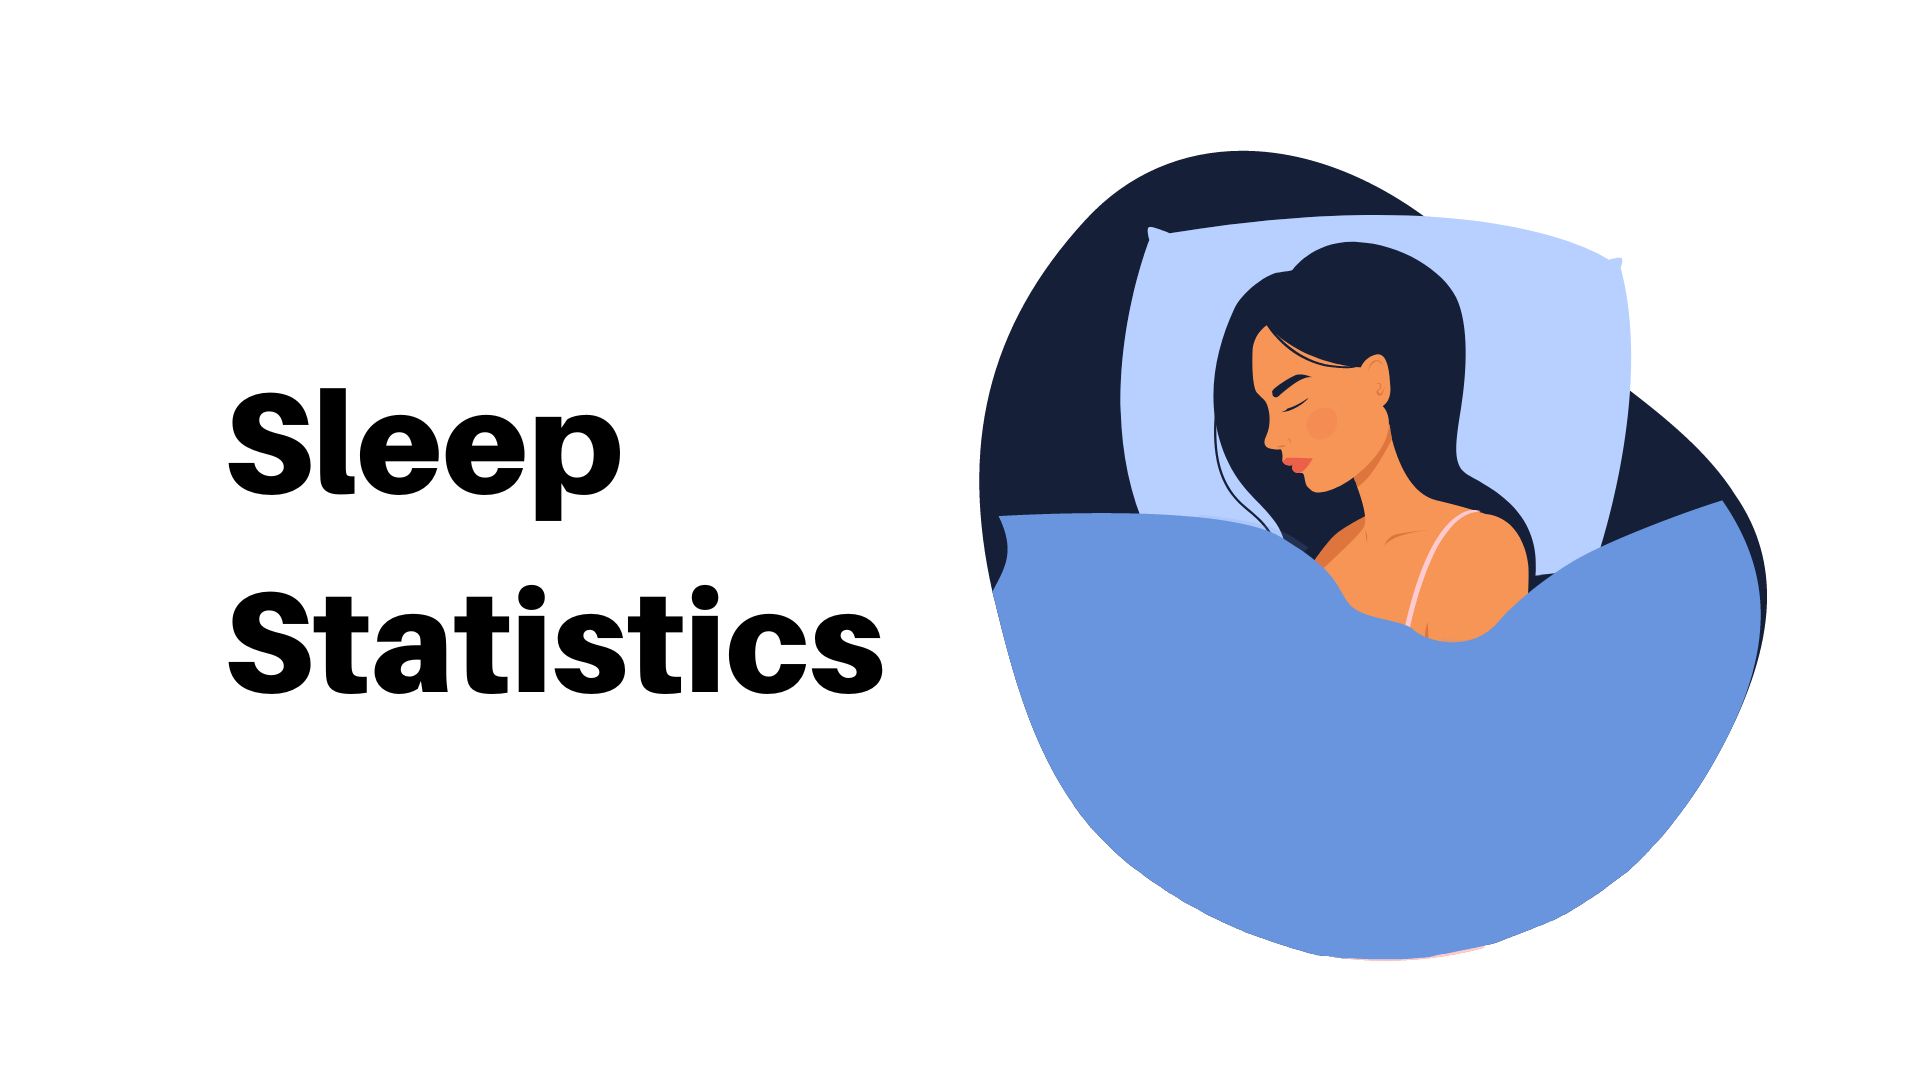 Sleep Statistics By Dreams, Country, Problems, Bedtime Worries, Demographics and Medications